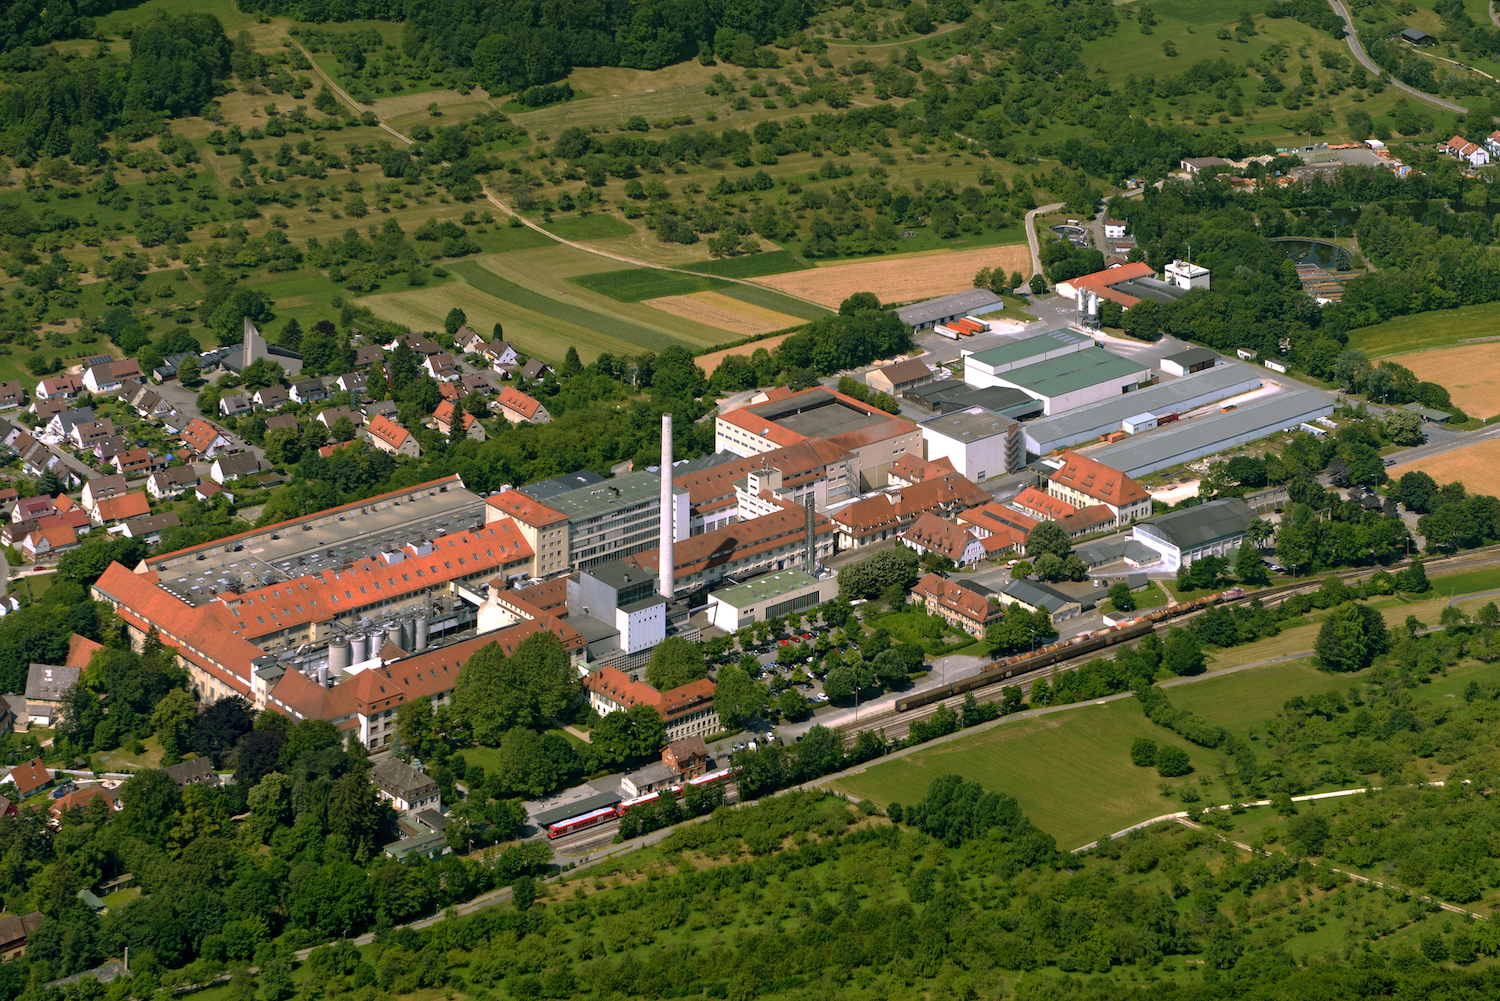 Aerial view of the Silphie Paper factory site in Lenningen.